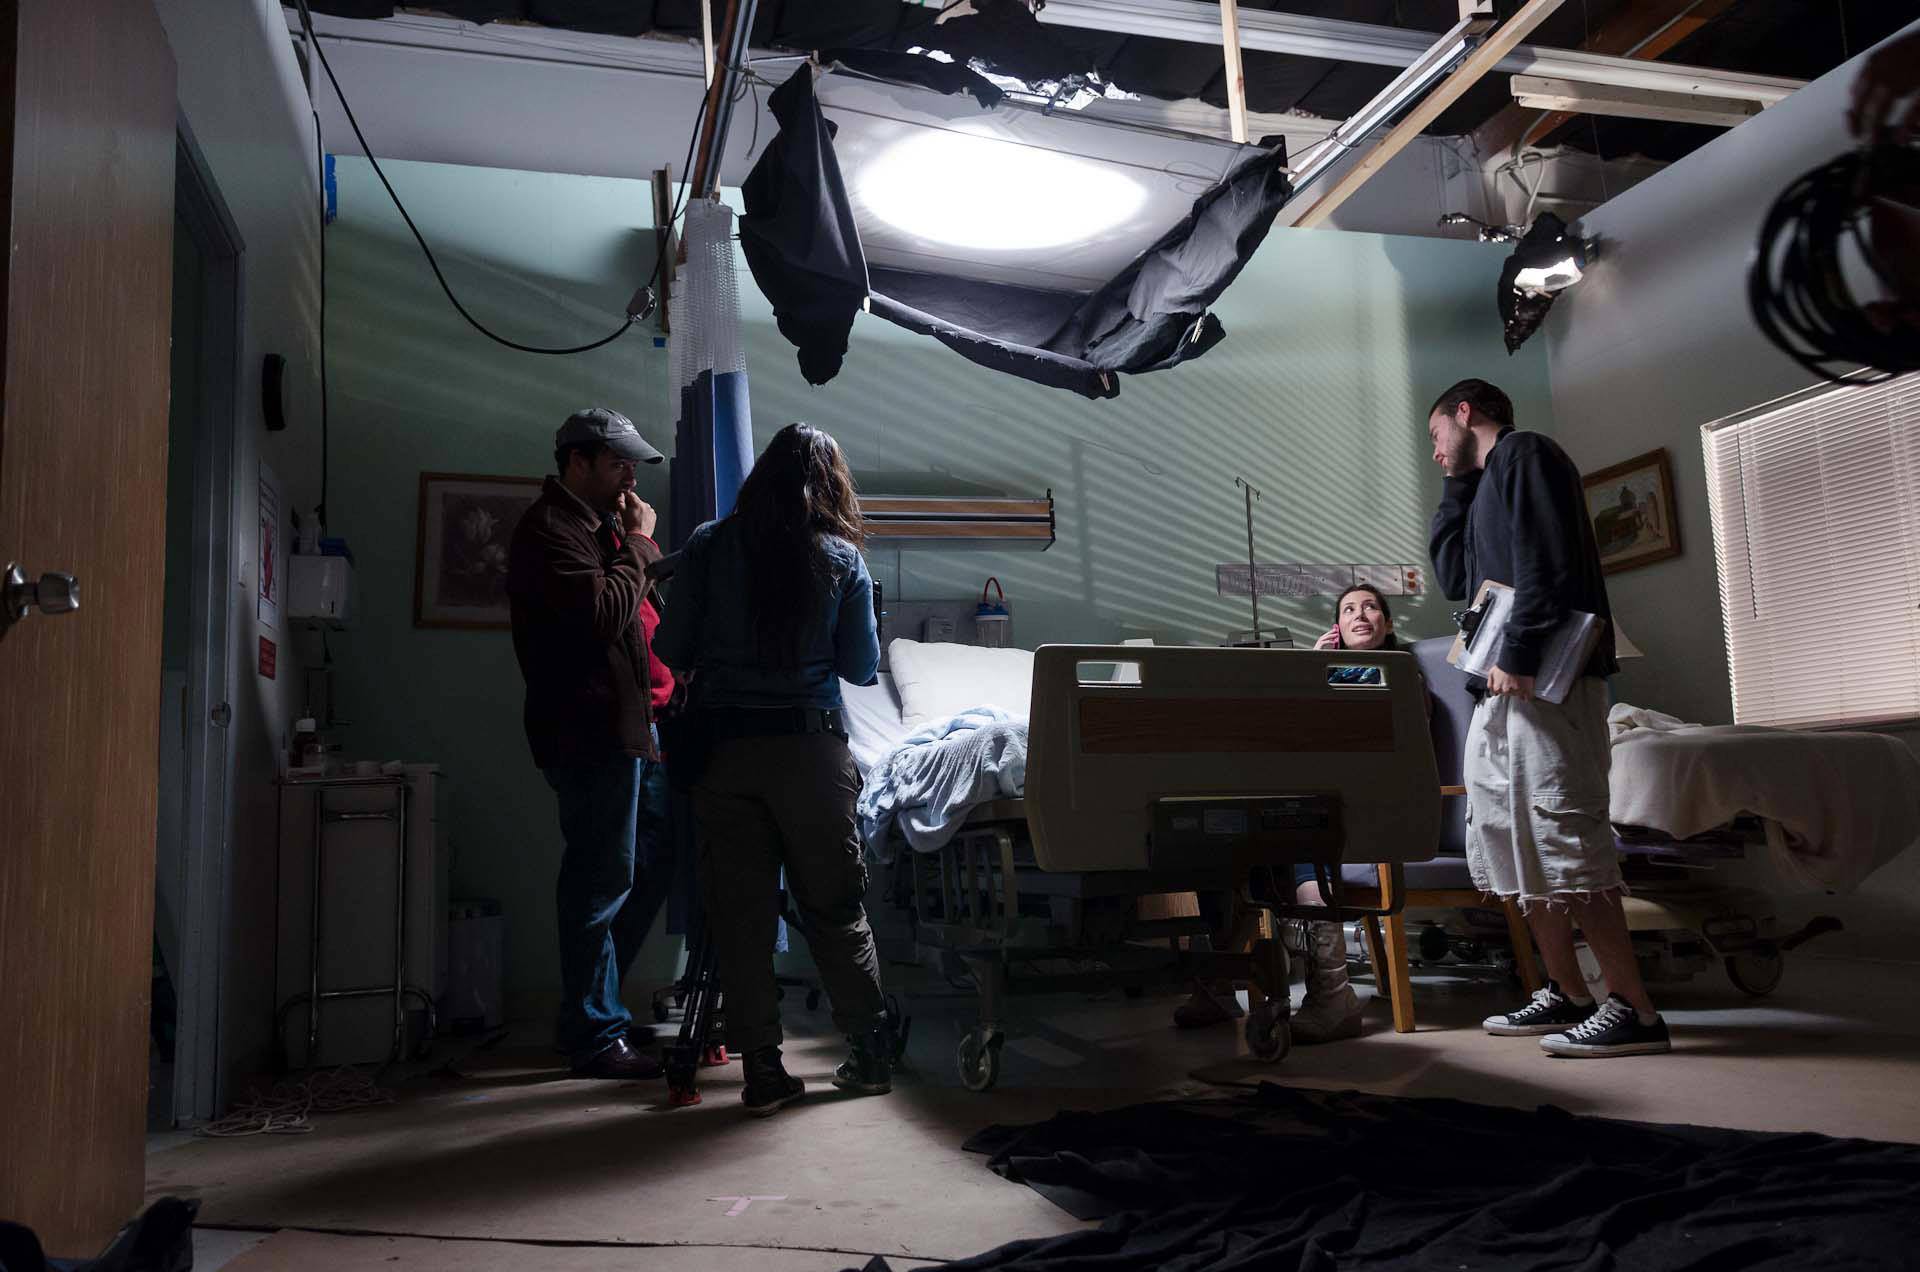 Director Gordon Milcham, 1st AC Jenny Hou, actress Isabella Cascarano, and 1st AD Sam McQueen on the set of The Lookout.